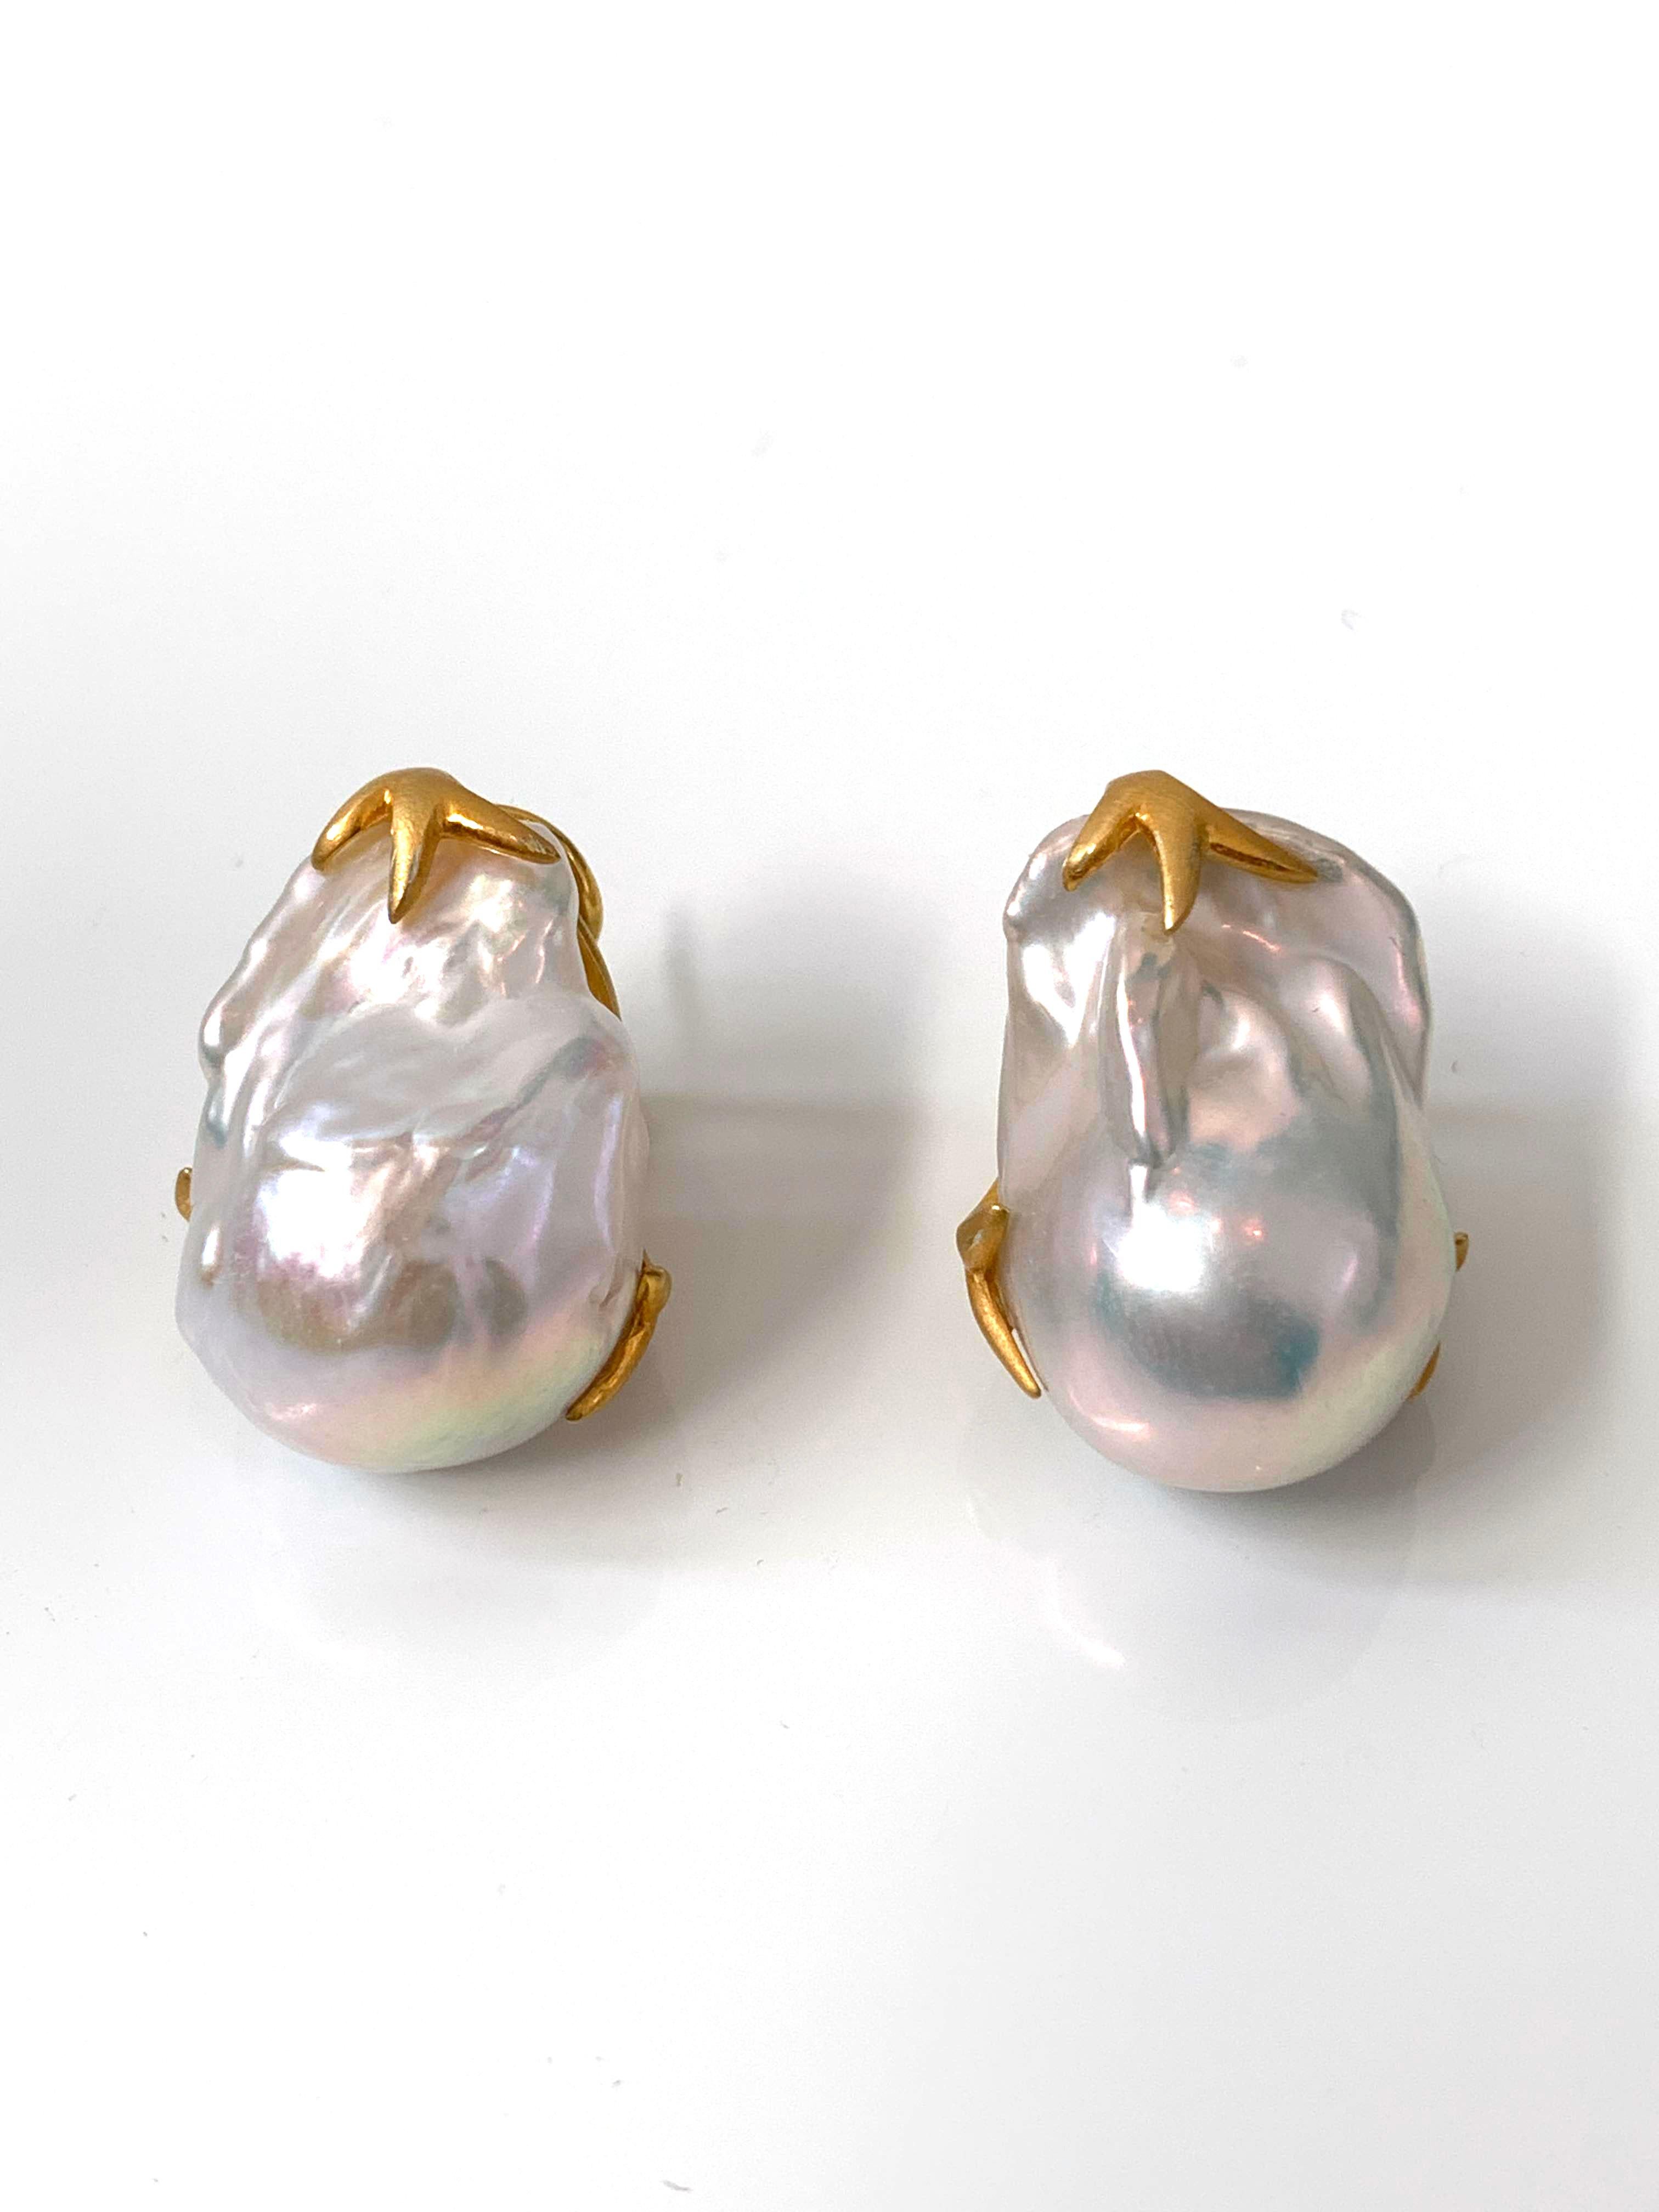 Beautiful pair of large lustrous freshwater baroque pearl earrings. The pair measures 15mm width and 23mm height, handset in vermeil 18k gold-plated sterling silver (matte finish). Post-clip backs provide addition support (Very comfortable). 

Each